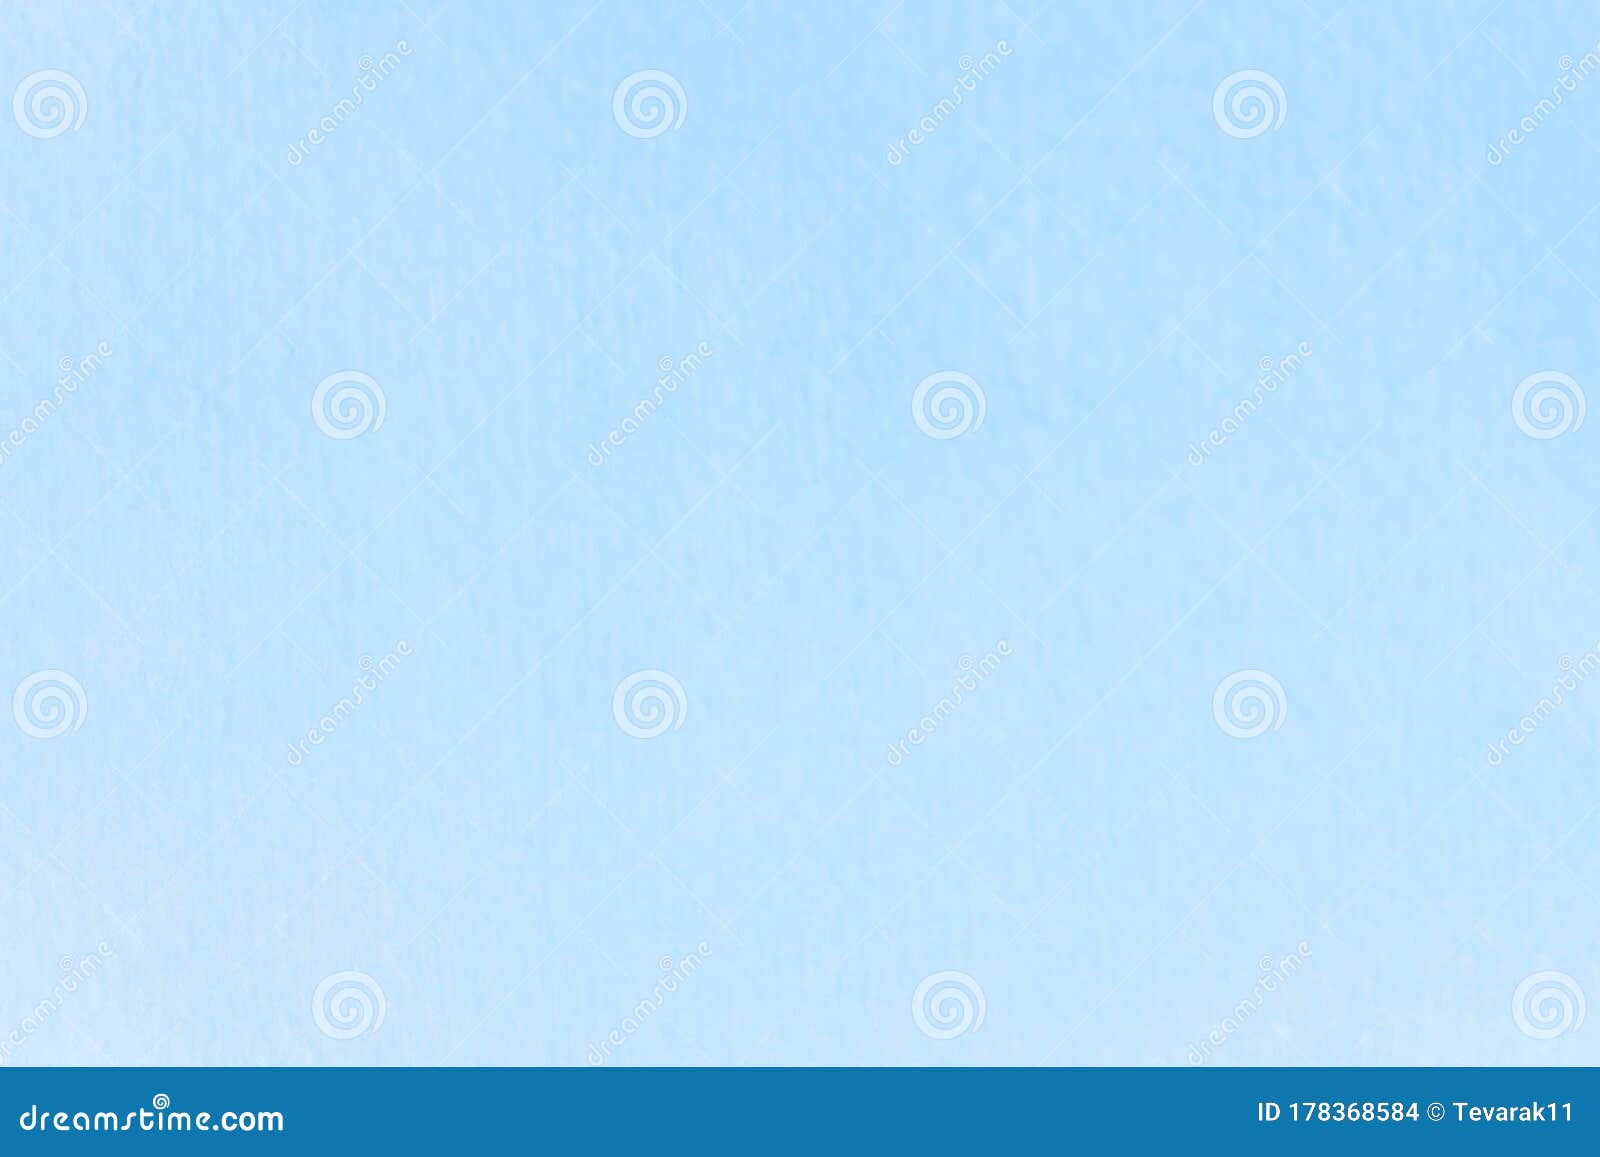 Watercolor Sky Blue Light Blue Texture As Background Stock Photo ...